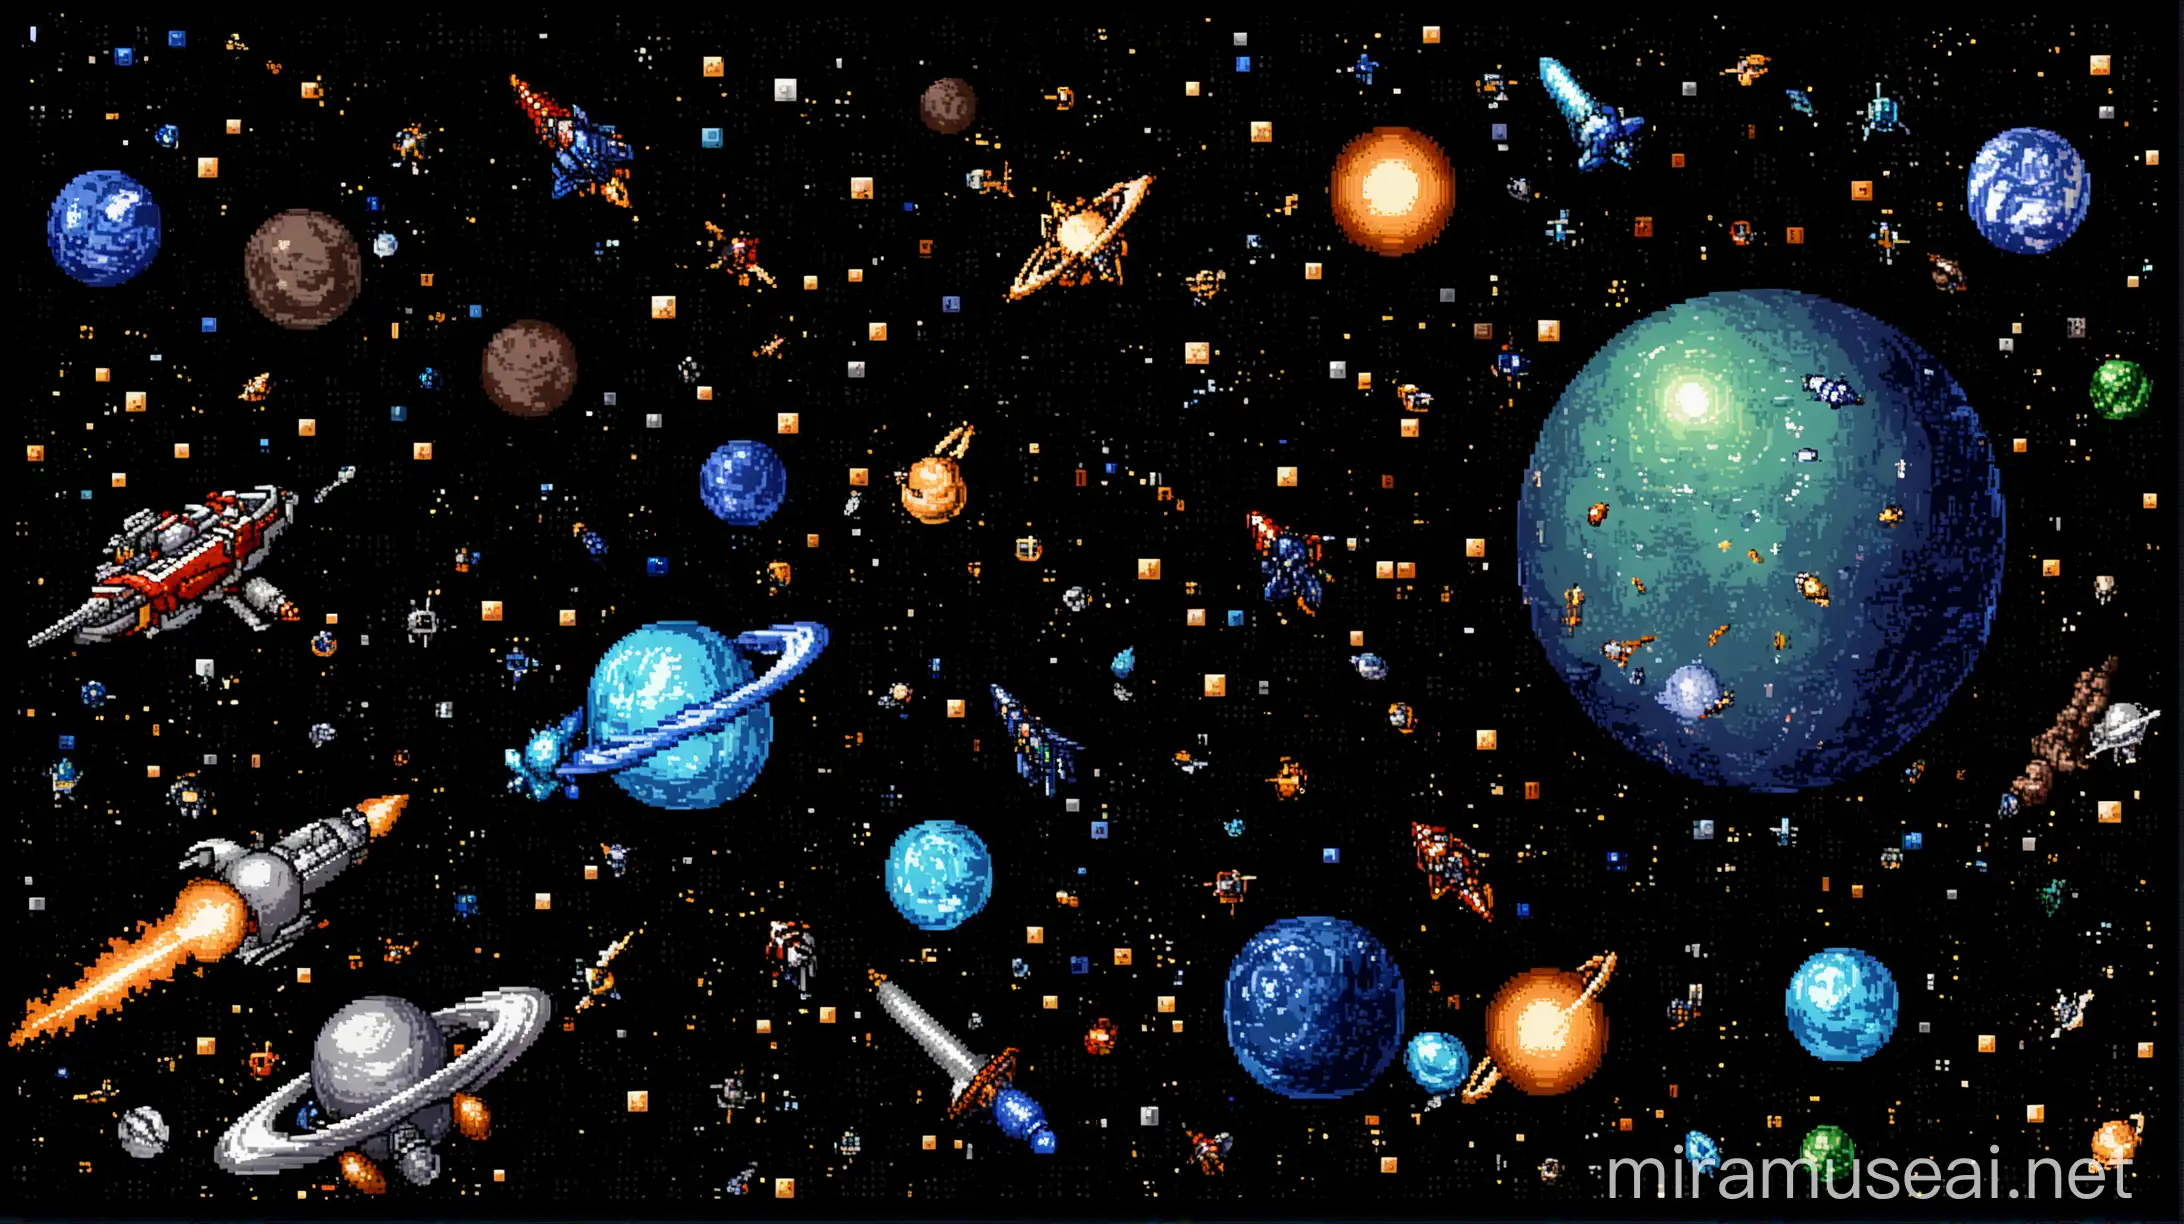 generate a 1920x1080 image in space galaxy with some meteors spaceships planets and use pixelart. can you make the image also have less prompts but only a couple of drawings i want it rather simple. Can you make the background also a bit transparent so that it blends better and reduce the art i want only 1 planet at the corner and then just a couple of small spaceships and meteros